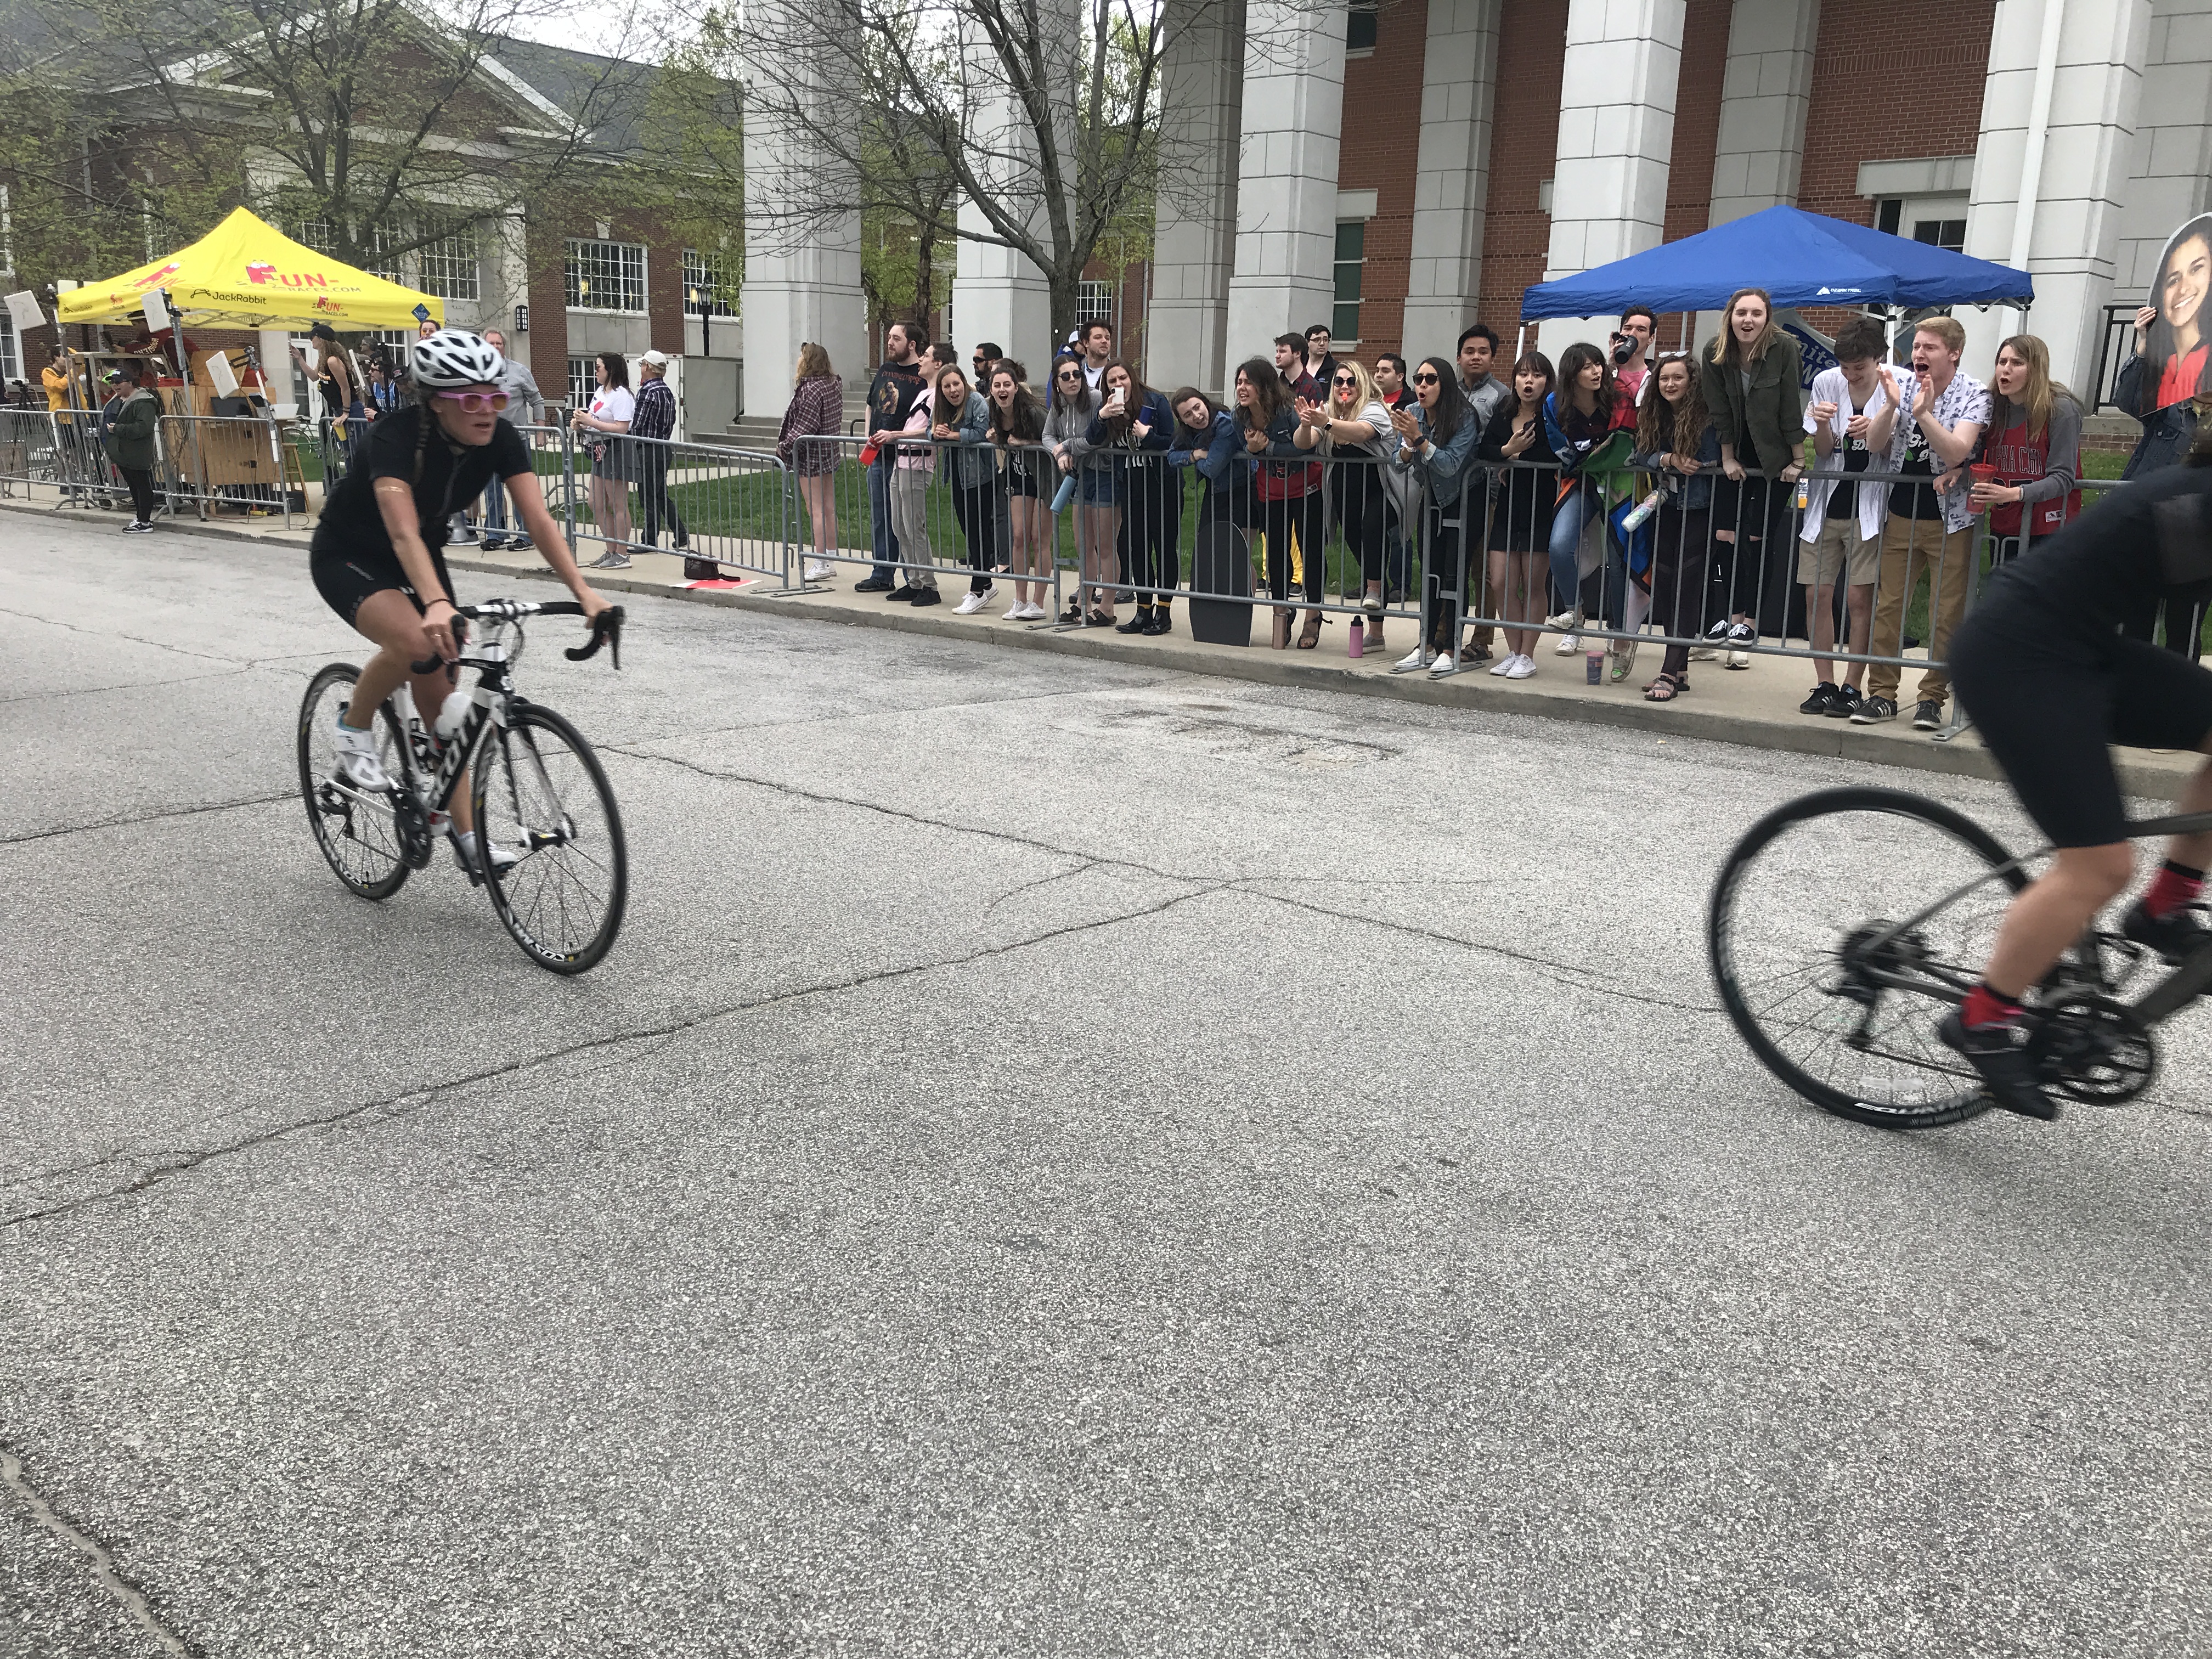 Crit 2019 (Photo by Katie Hunger)